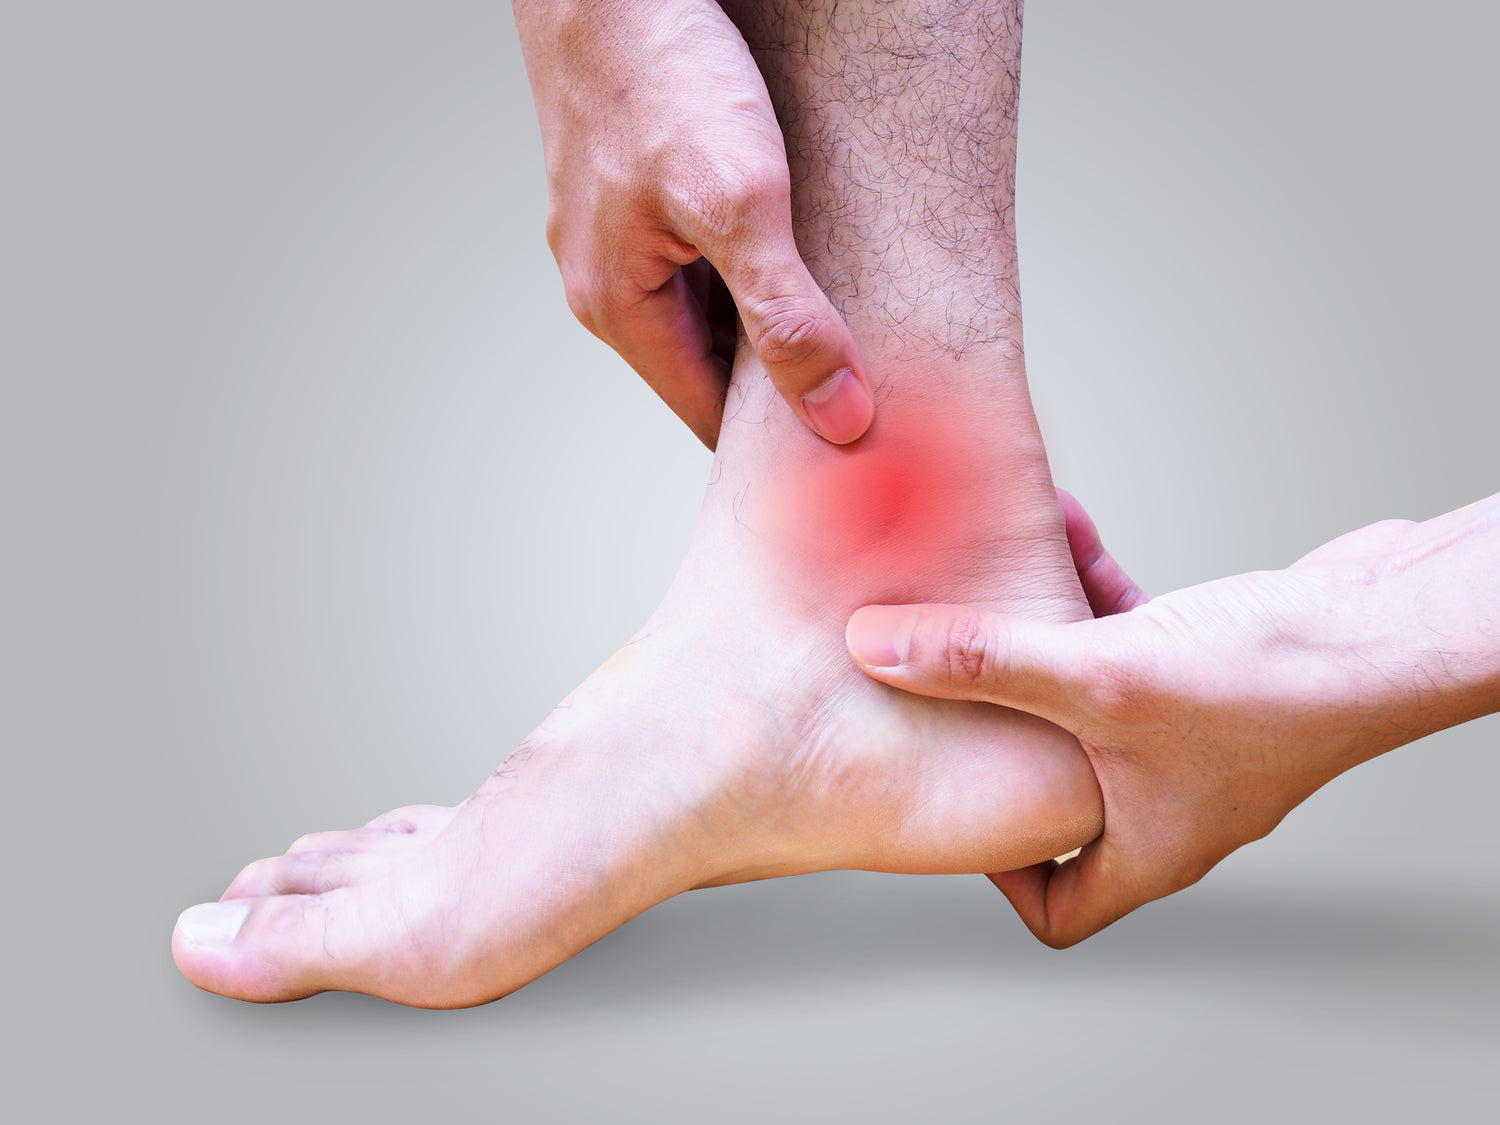 How To Heal A Sprained Ankle